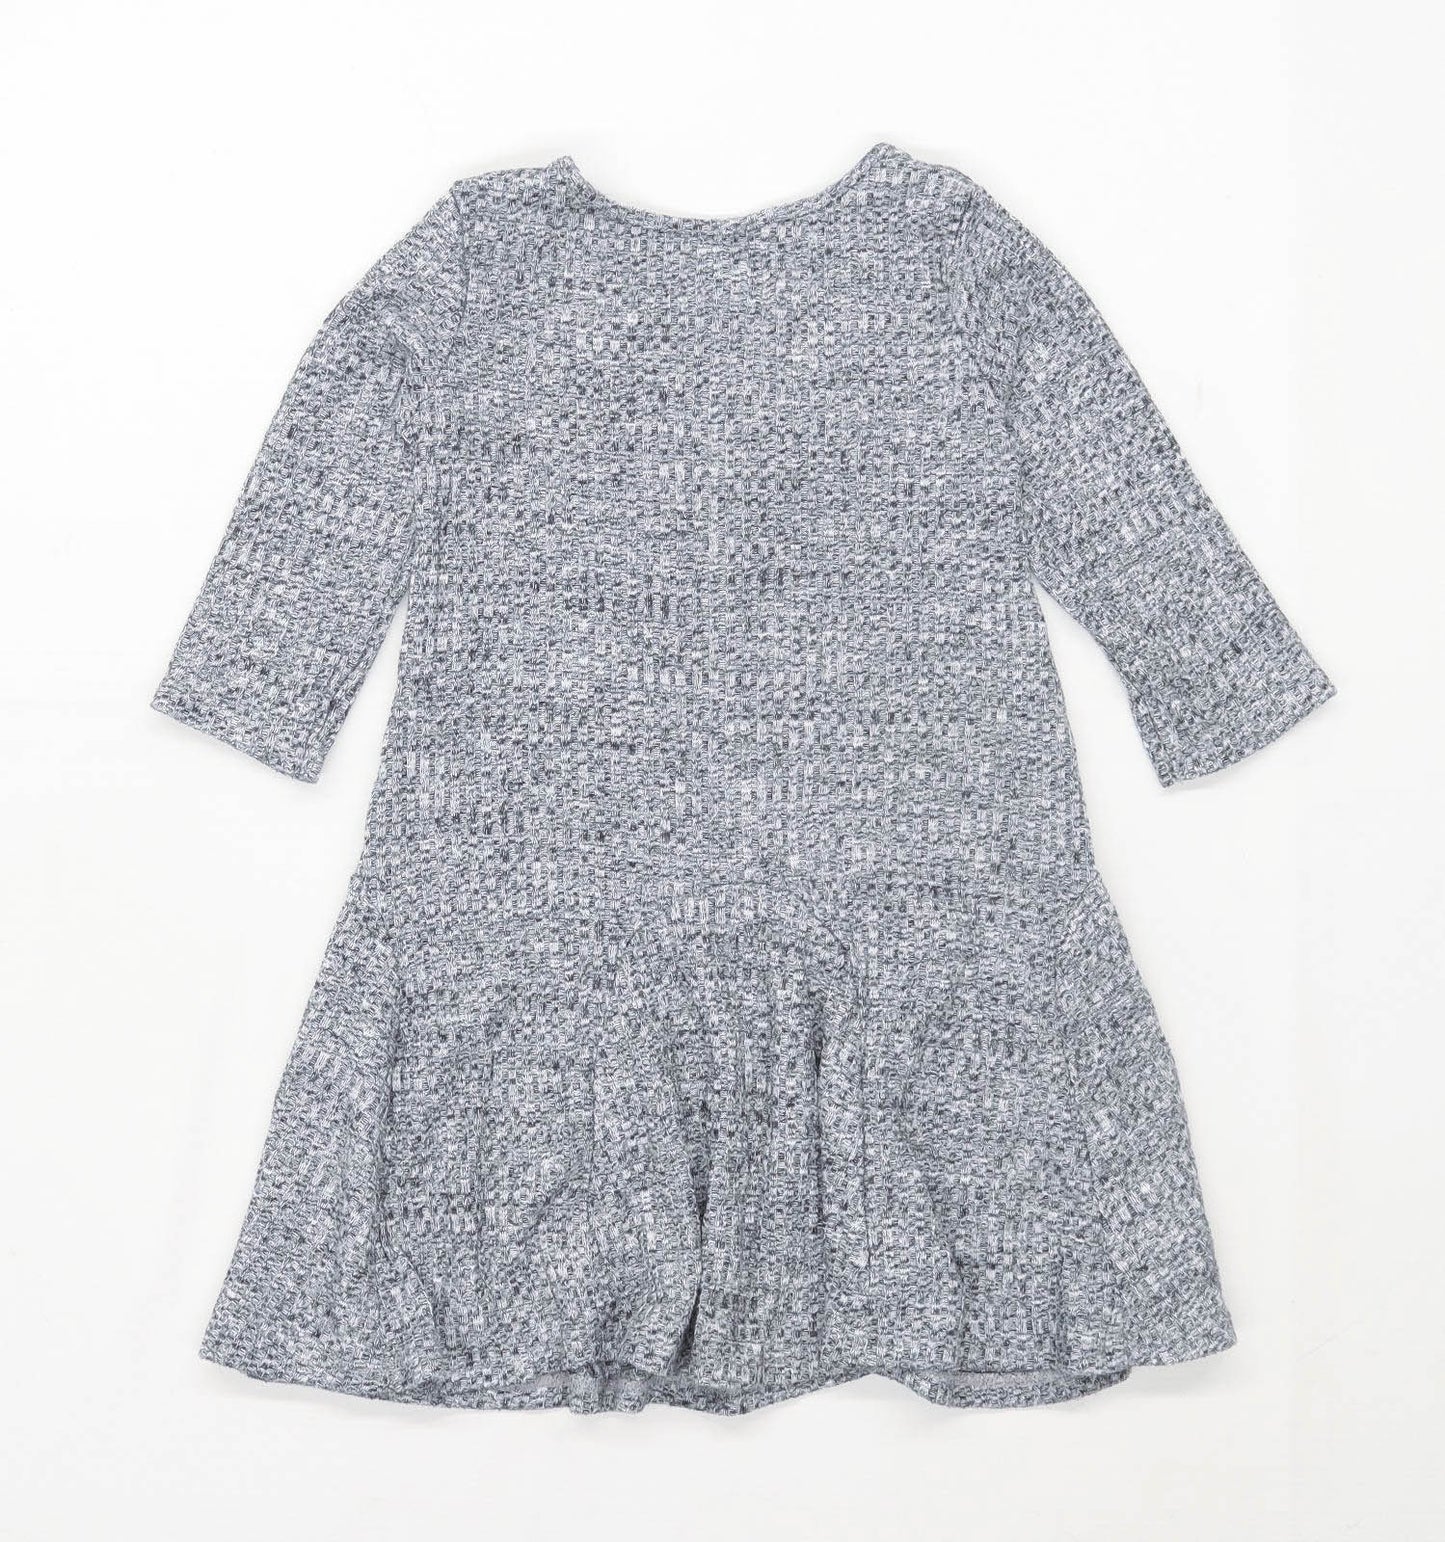 The Childrens Place Girls Grey Dress Age 5 Years